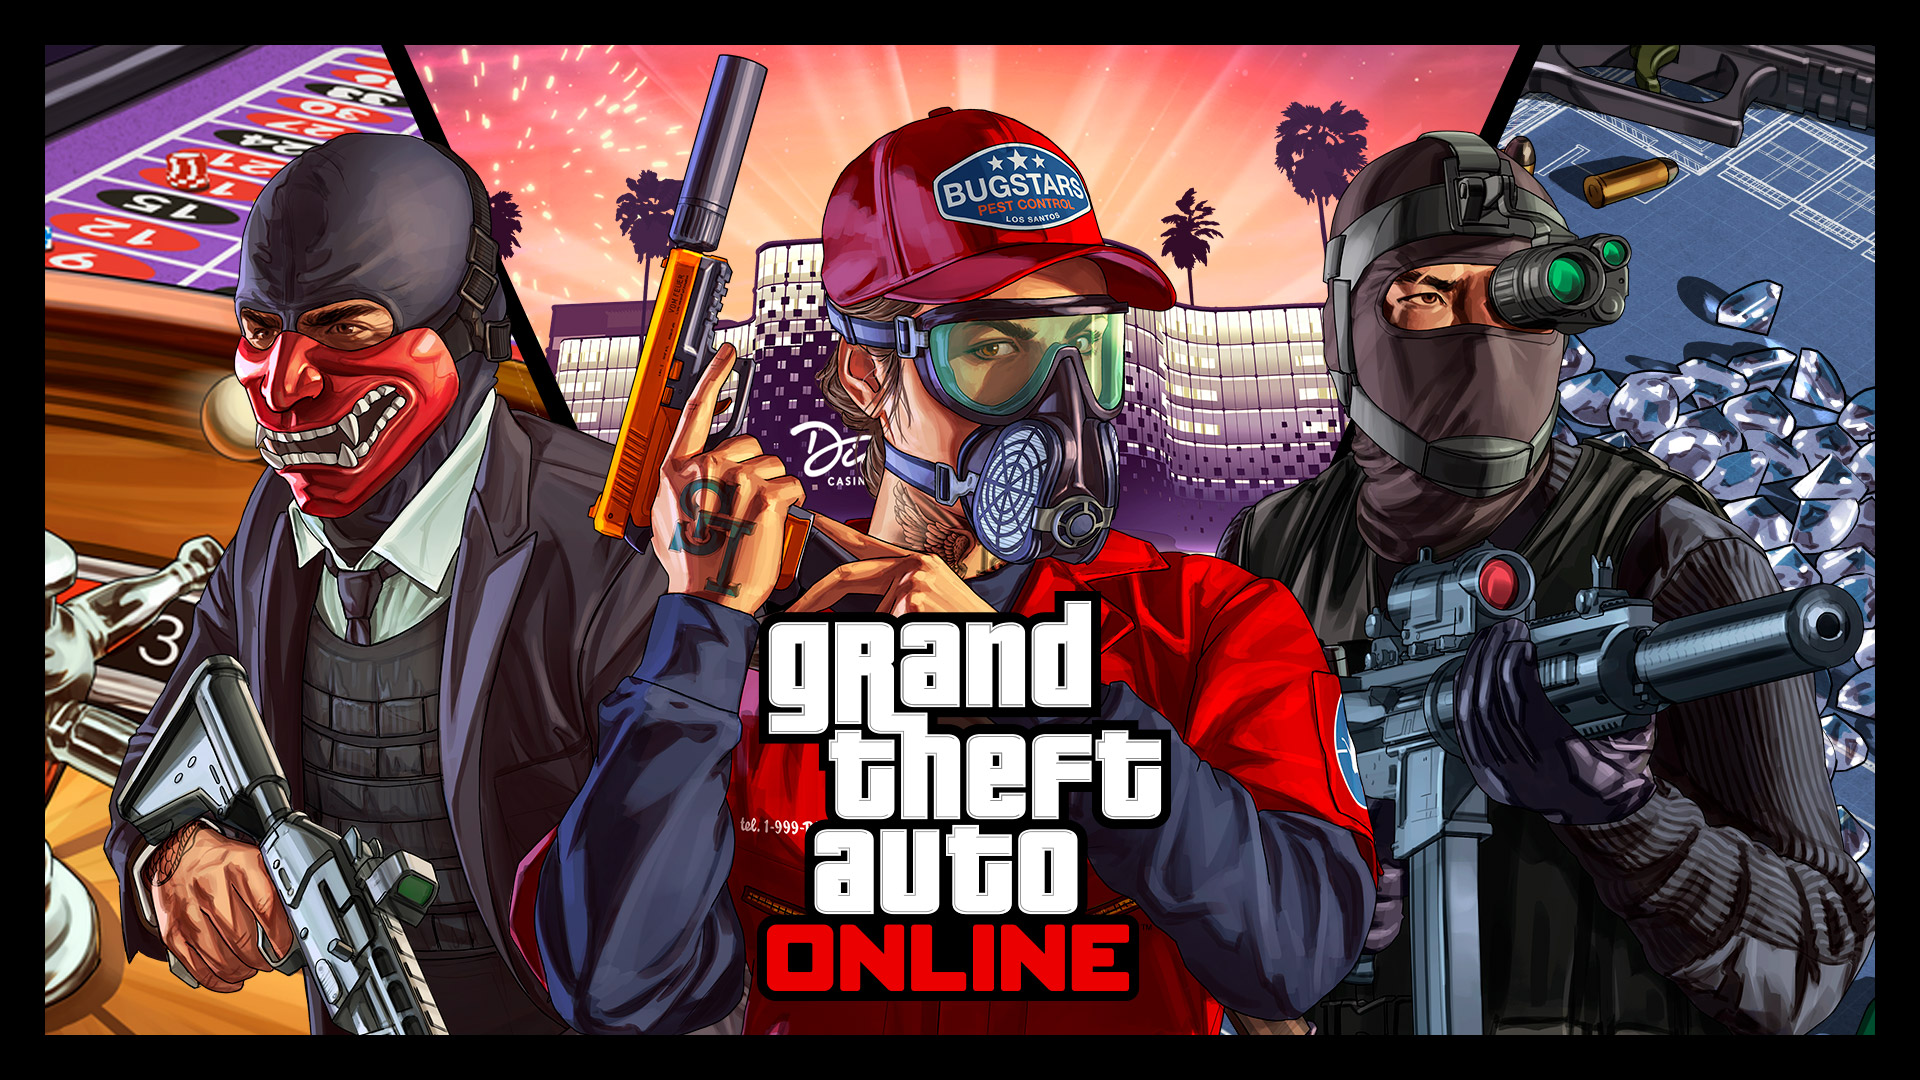 GTA Online to be free on PlayStation this coming weekend